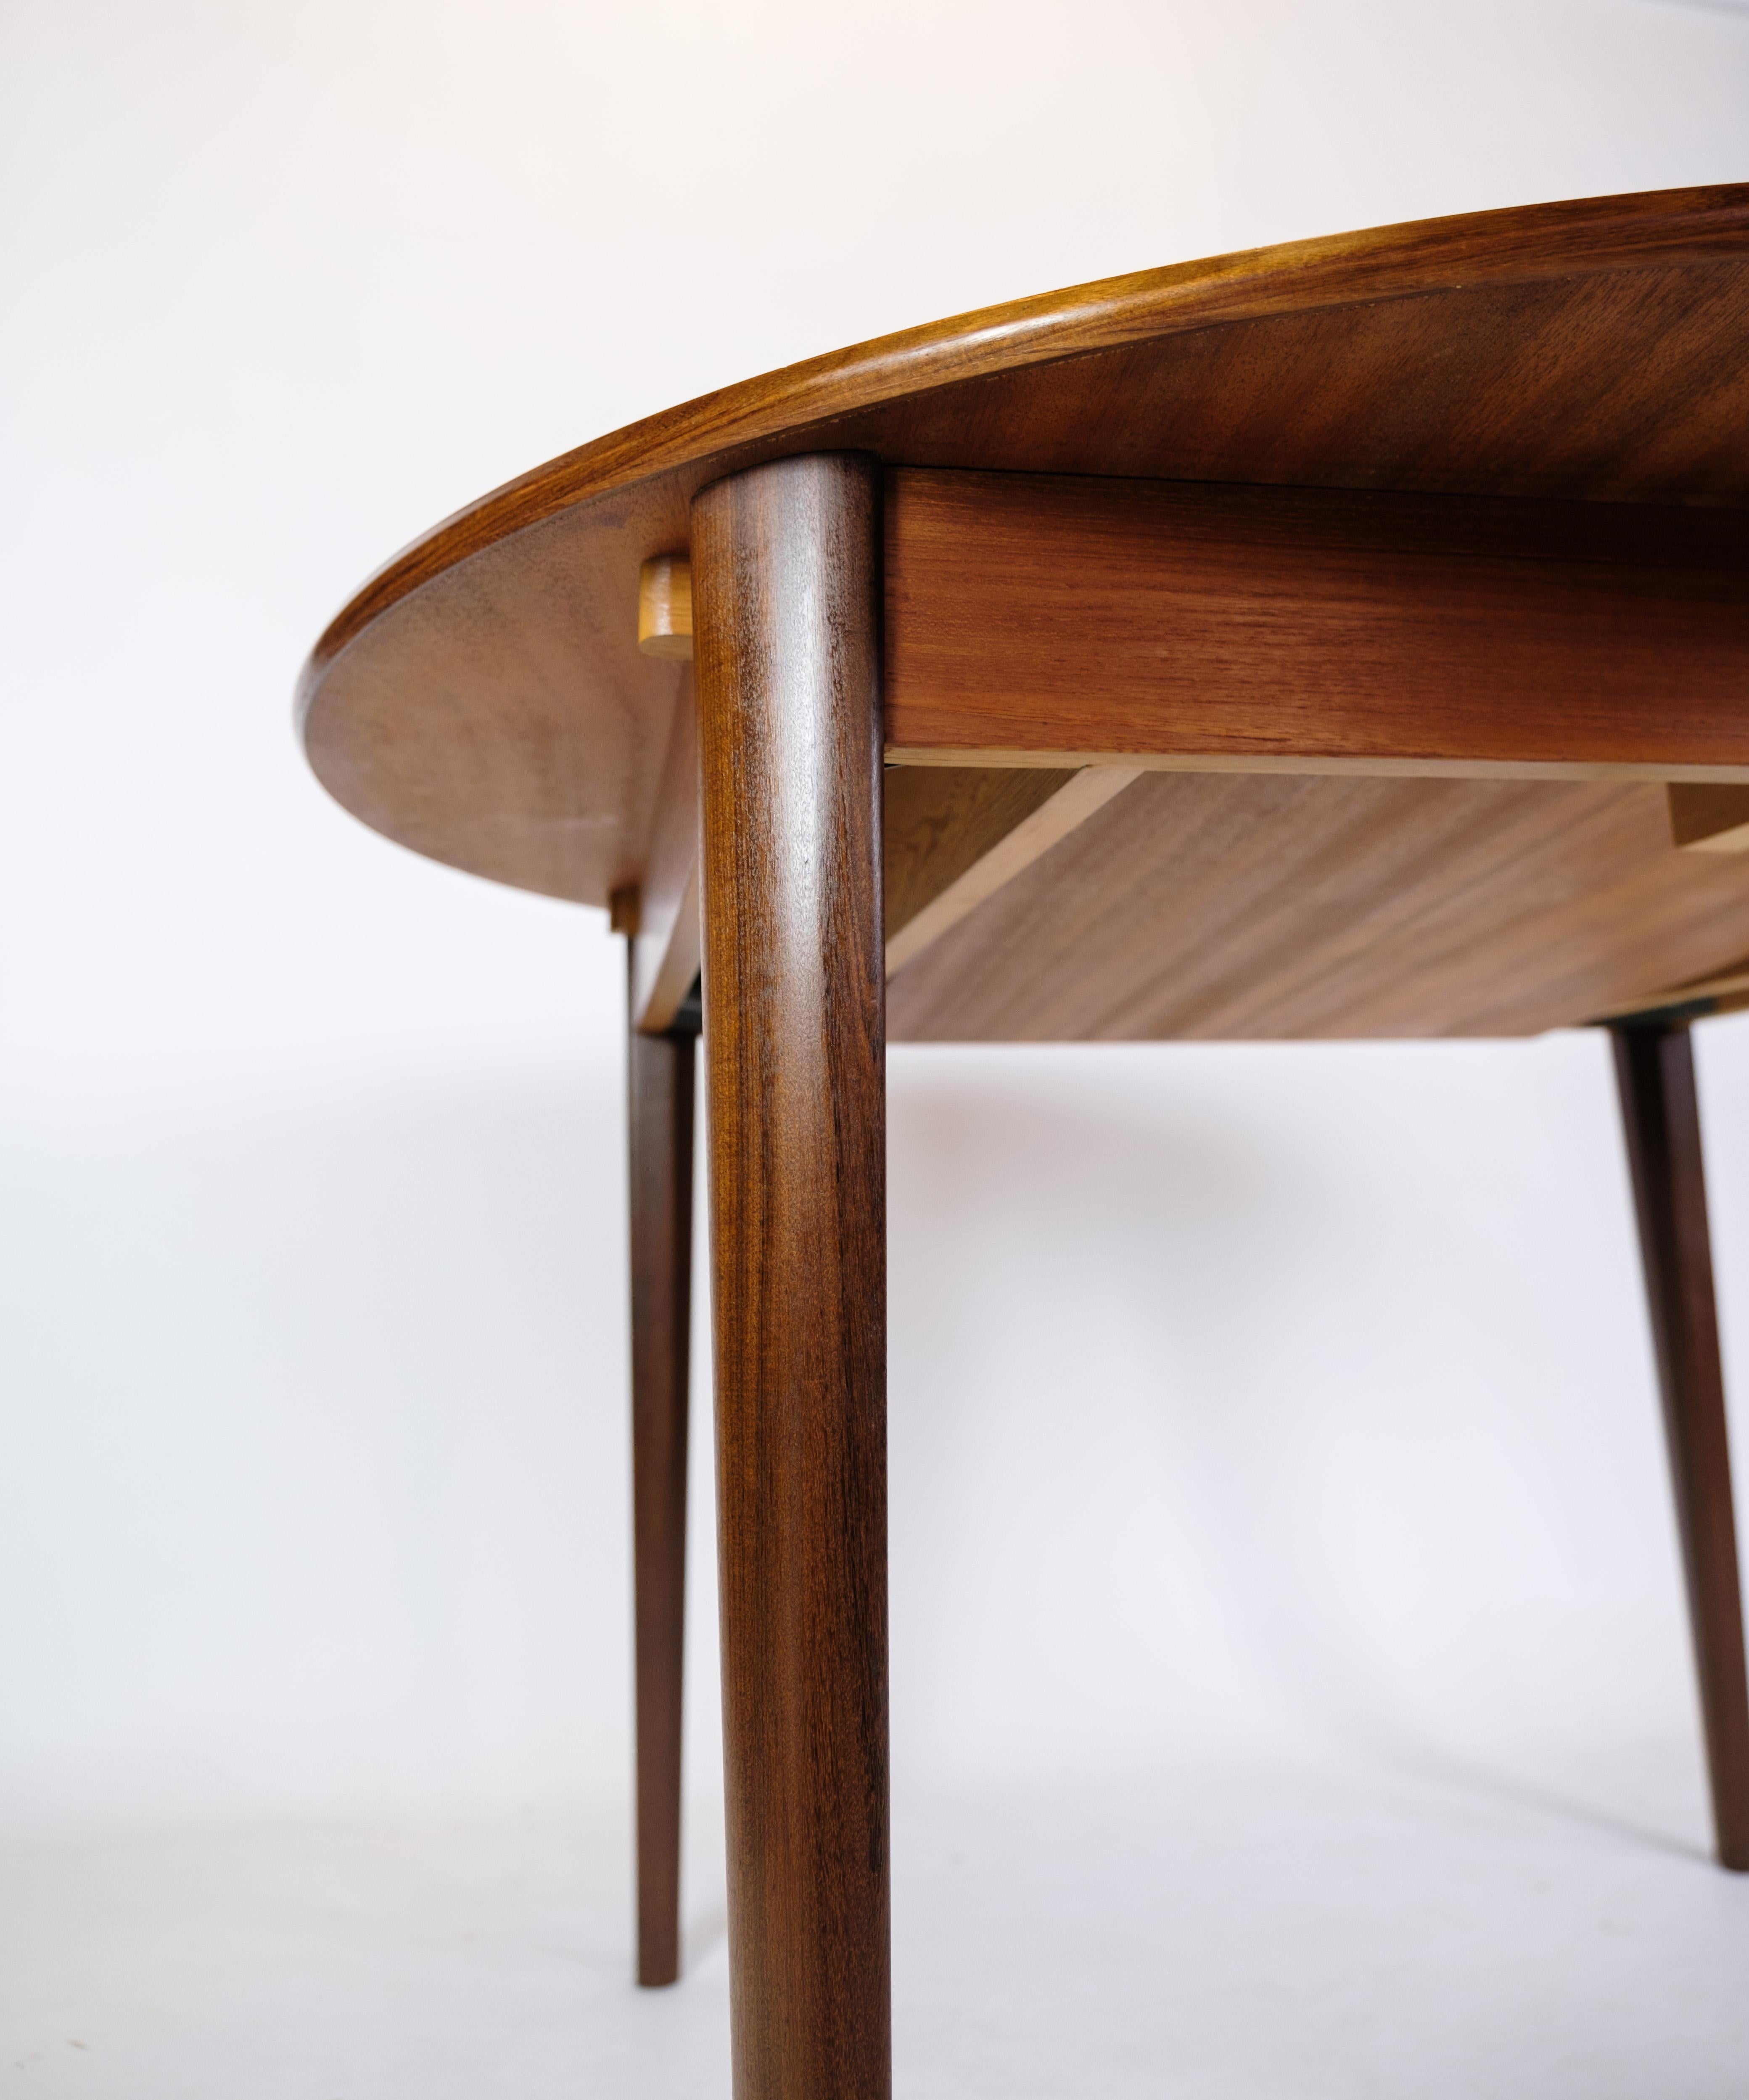 Mid-20th Century Dining table In Teak wood of Danish Design From the 1960 For Sale